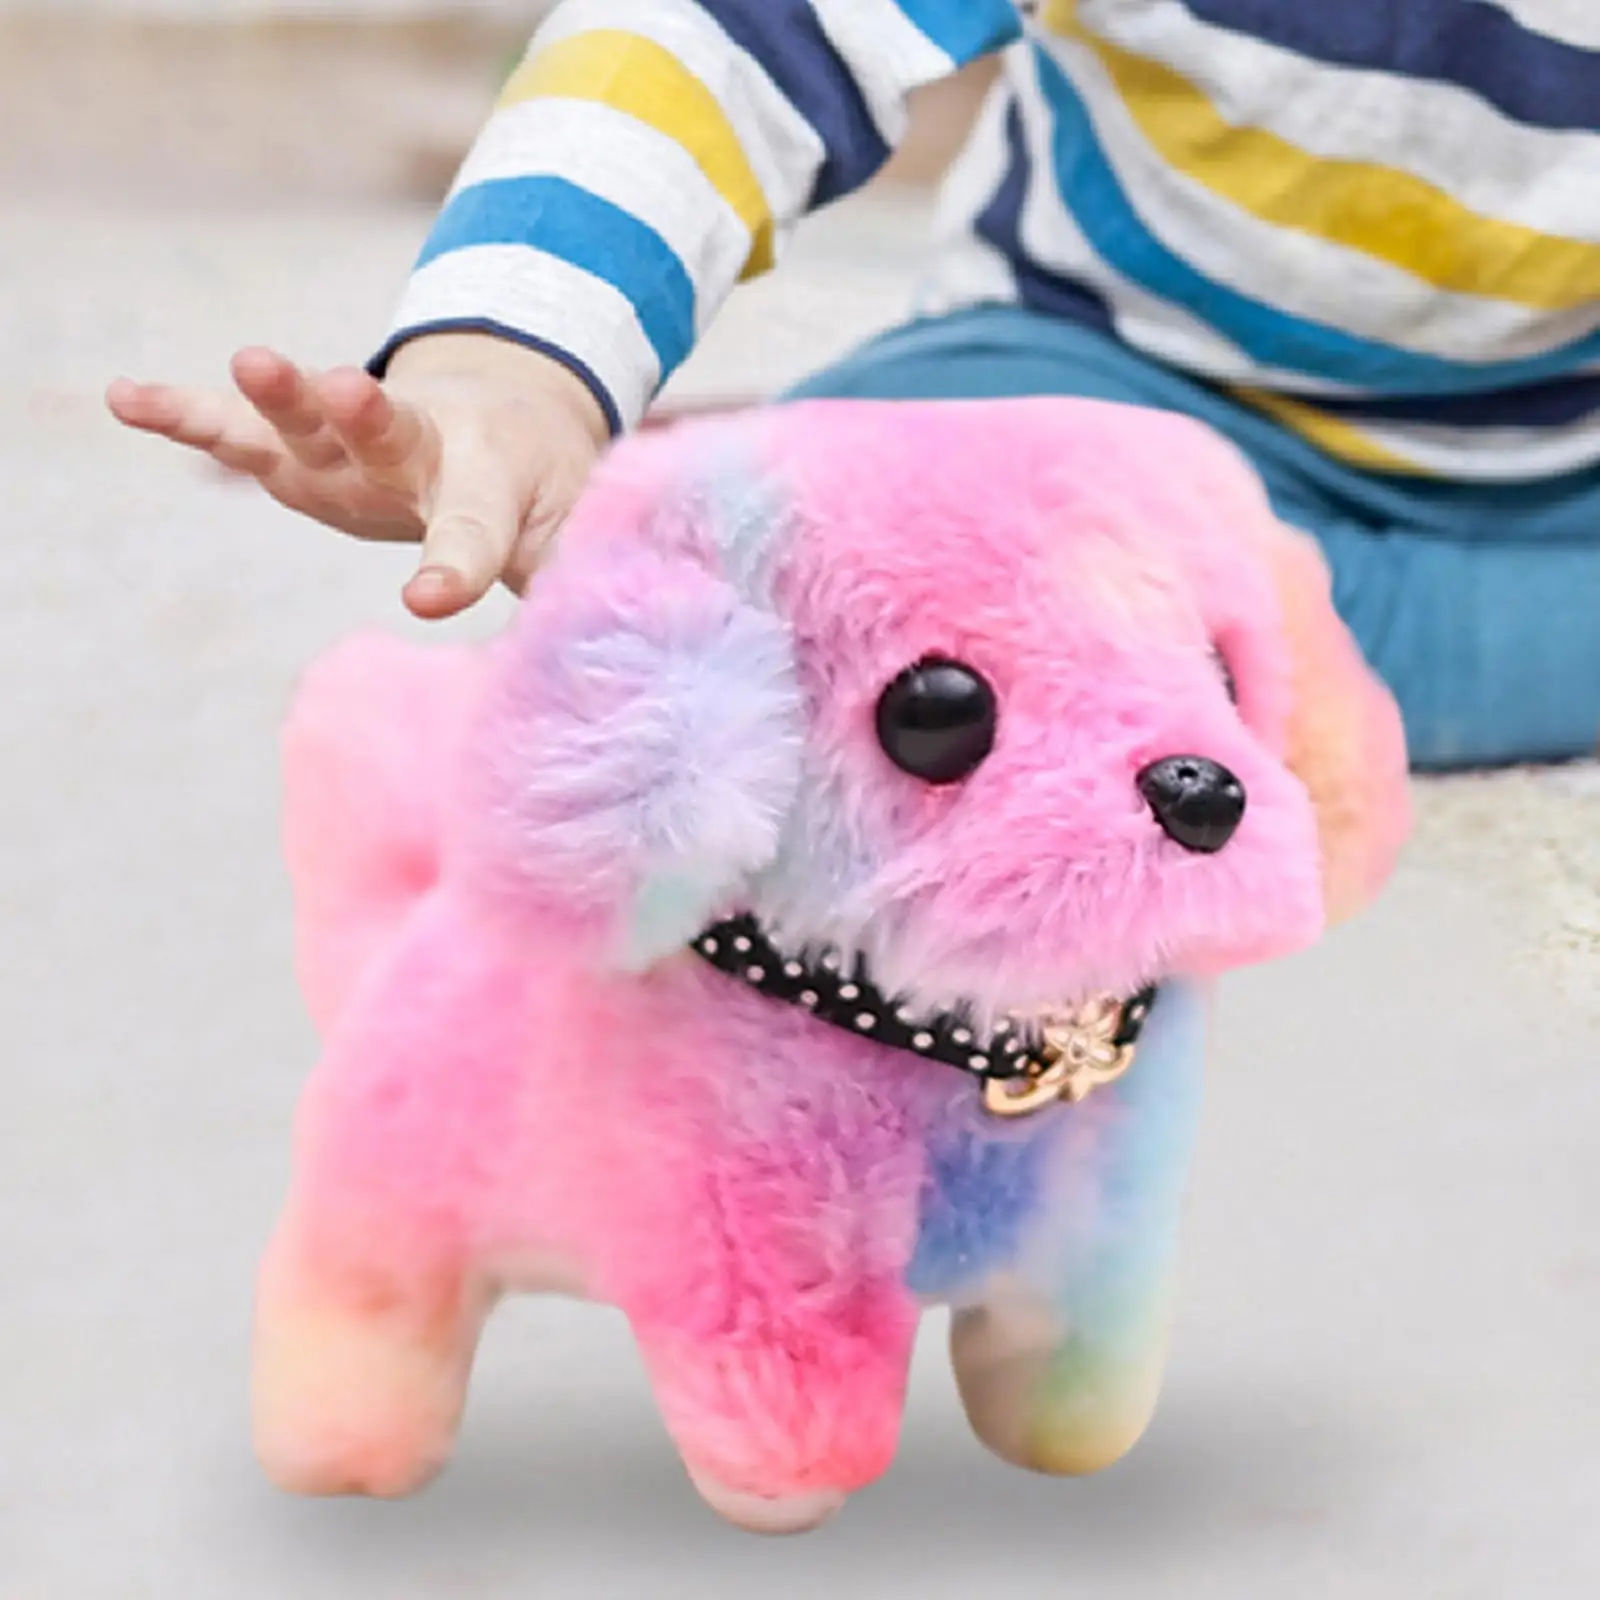 Interactive Electronic Pet Soft Stuffed Animals for Children Toys Christmas Present Party Favor Birthday Gifts Boys Girls